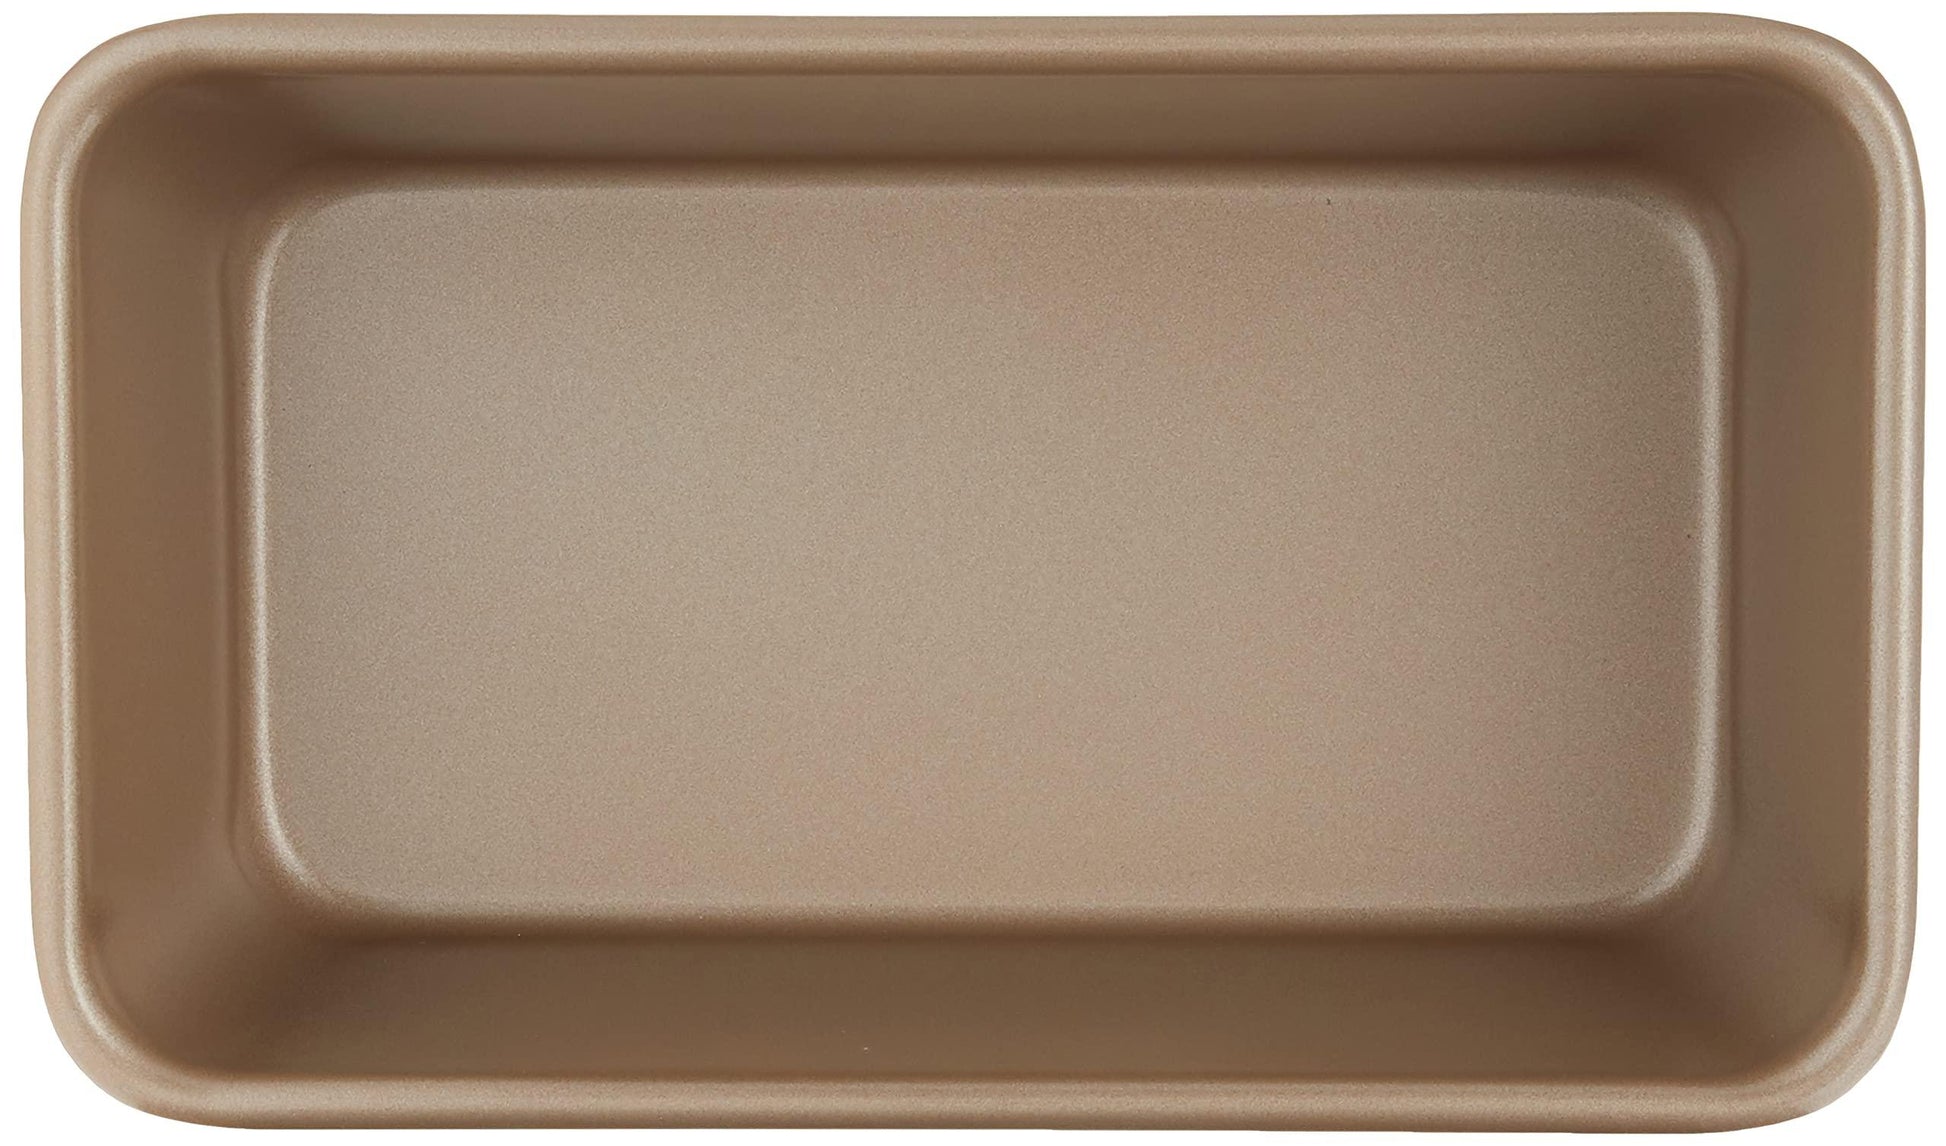 Cuisinart 9-Inch Chef's Classic Nonstick Bakeware Loaf Pan, Champagne - CookCave